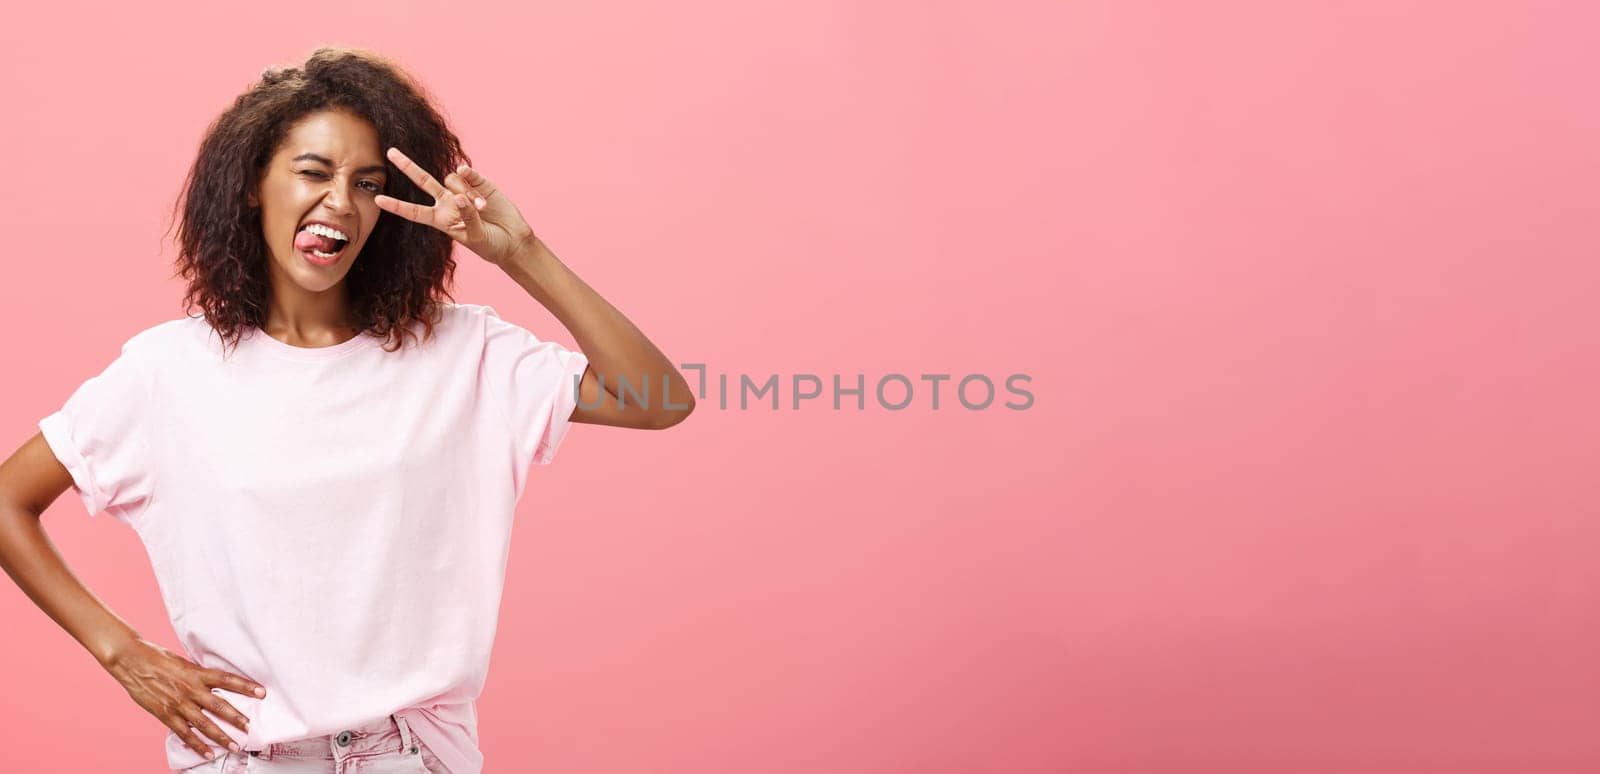 Not afraid express myself. Joyful charismatic african american woman in t-shirt with afro haircut showing tongue playfully and daring making peace sign over eye and winking posing over pink background.